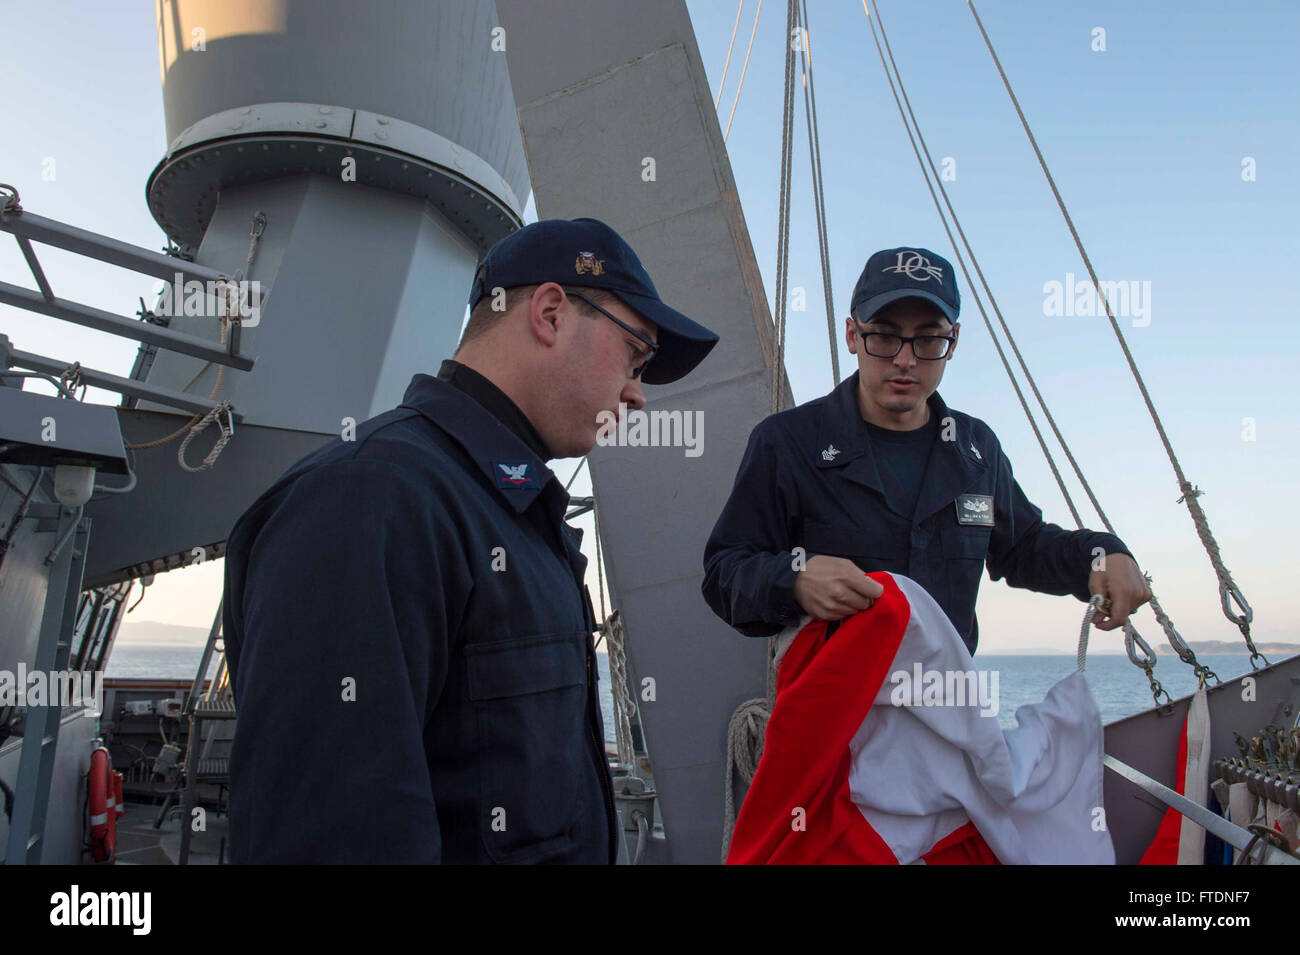 160319-N-TC720-041 ADRIATIC SEA (March 19, 2016) Operations Specialist 1st Class William Trent, from Wichita Falls, Texas, trains Operations Specialist 3rd Class Matthew McKeever, from Jersey City, New Jersey on ship’s flags, aboard USS Donald Cook (DDG 75) Mar. 19, 2016. Donald Cook, an Arleigh Burke-class guided-missile destroyer, forward deployed to Rota, Spain is conducting a routine patrol in the U.S. 6th Fleet area of operations in support of U.S. national security interests in Europe. (U.S. Navy photo by Mass Communication Specialist 2nd Class Mat Murch/Released) Stock Photo